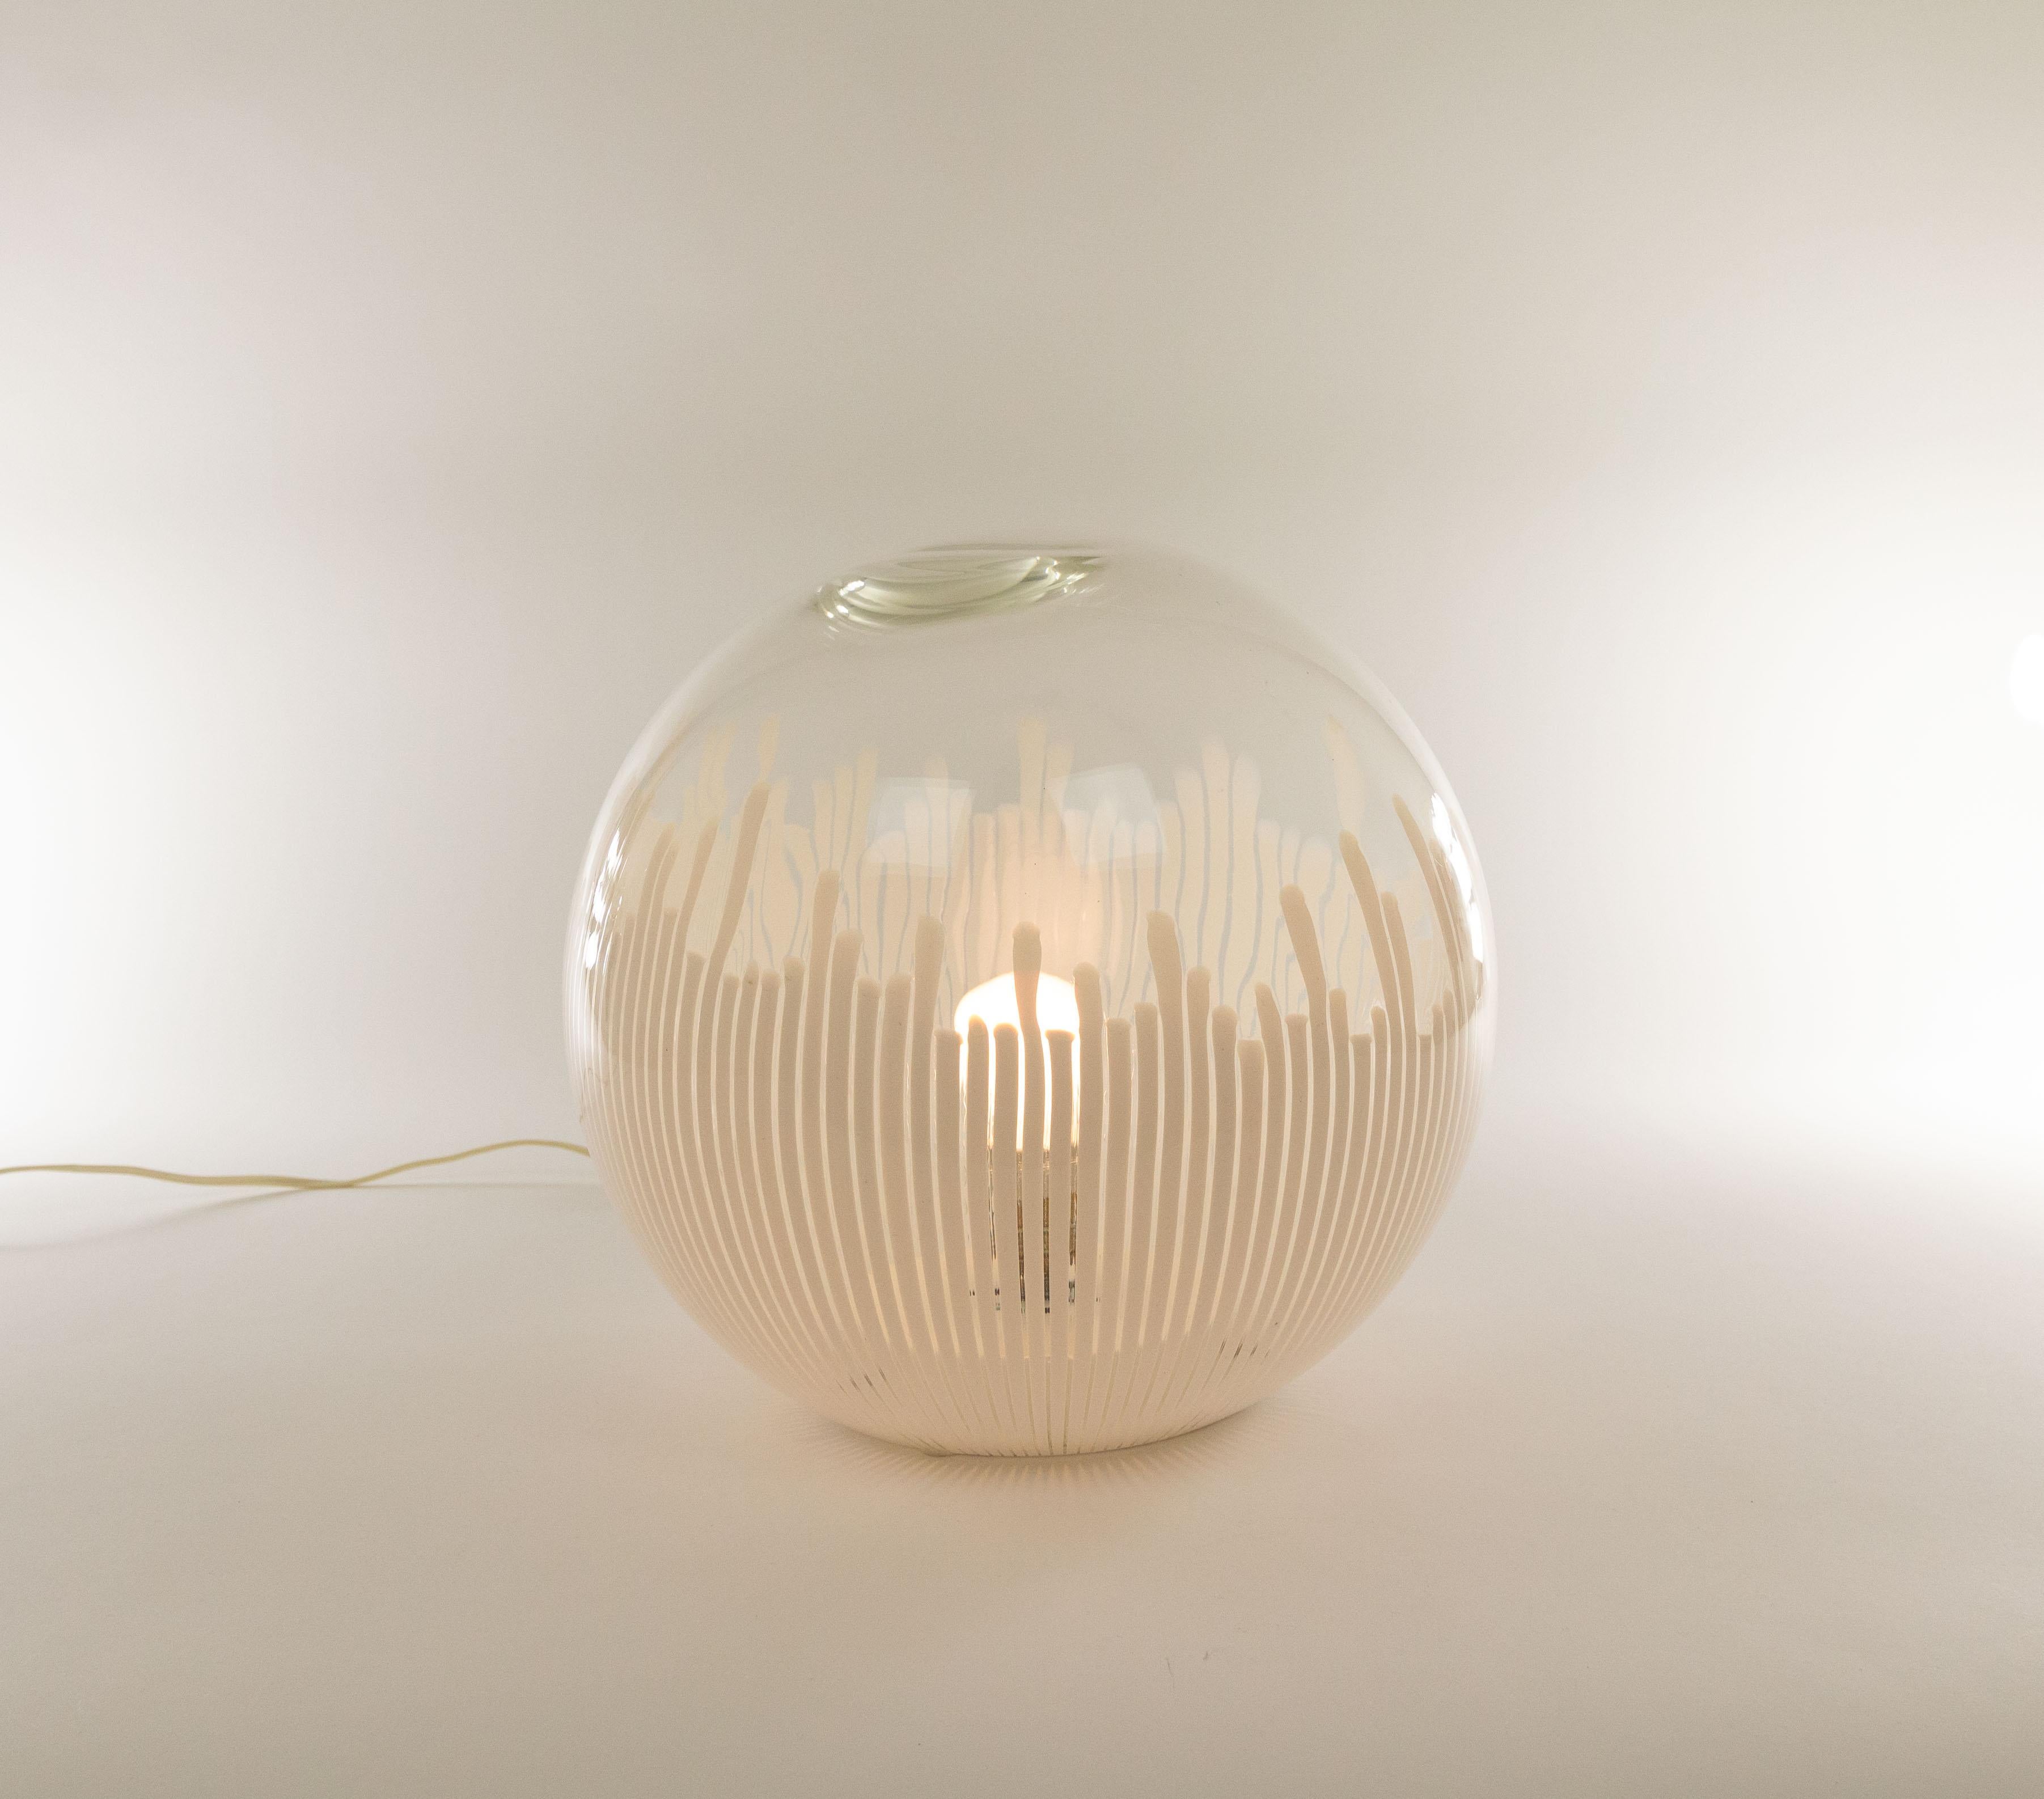 Anemone hand-blown glass table lamp designed by Ludovico Diaz de Santillana for Murano glass specialist Venini in the 1970s.

The elegant model that seems to have been inspired by sea anemones was originally executed in white, amber and green. The